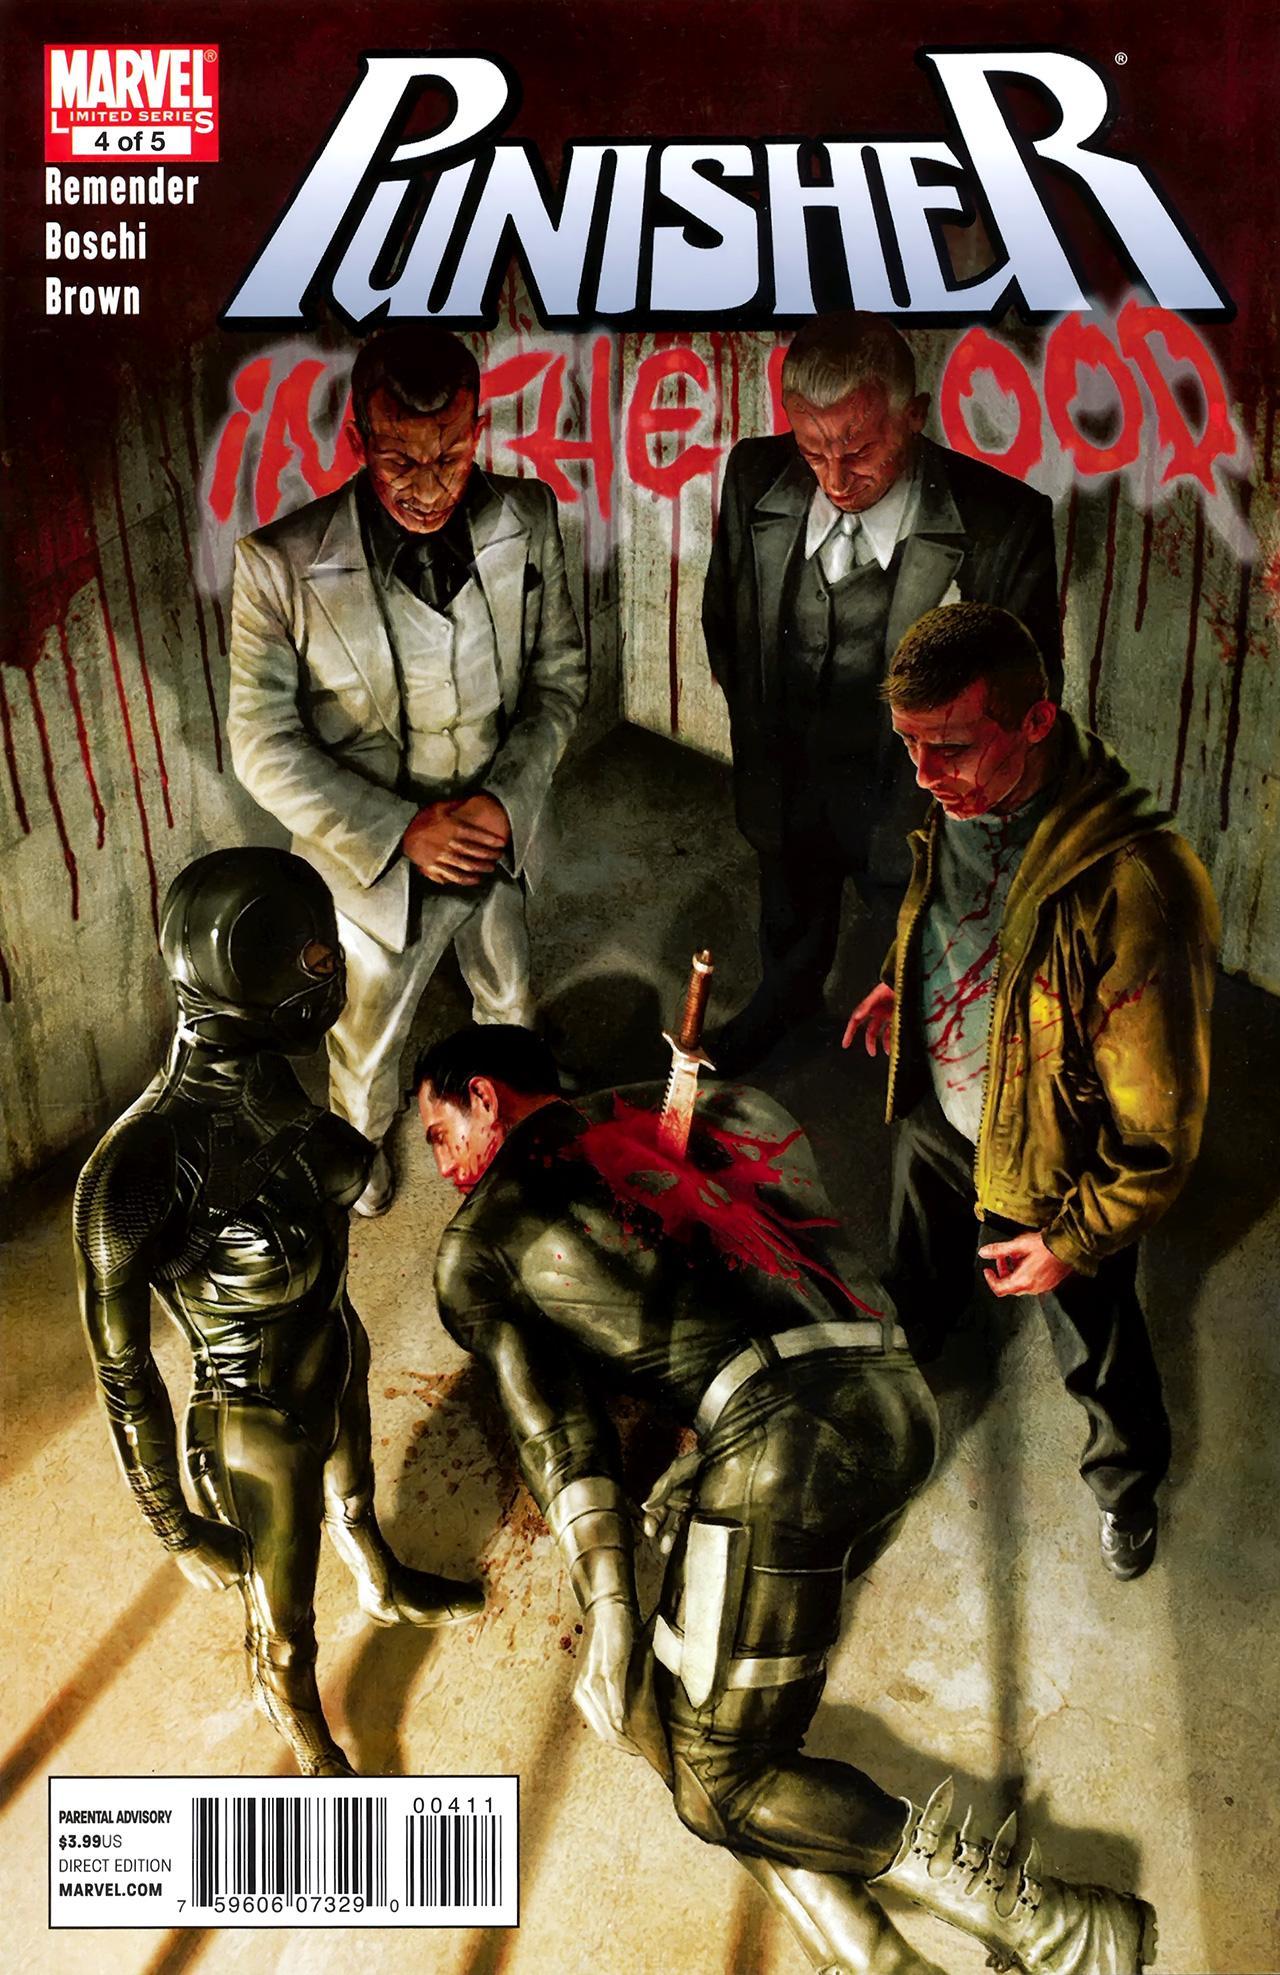 Punisher: In the Blood Vol. 1 #4